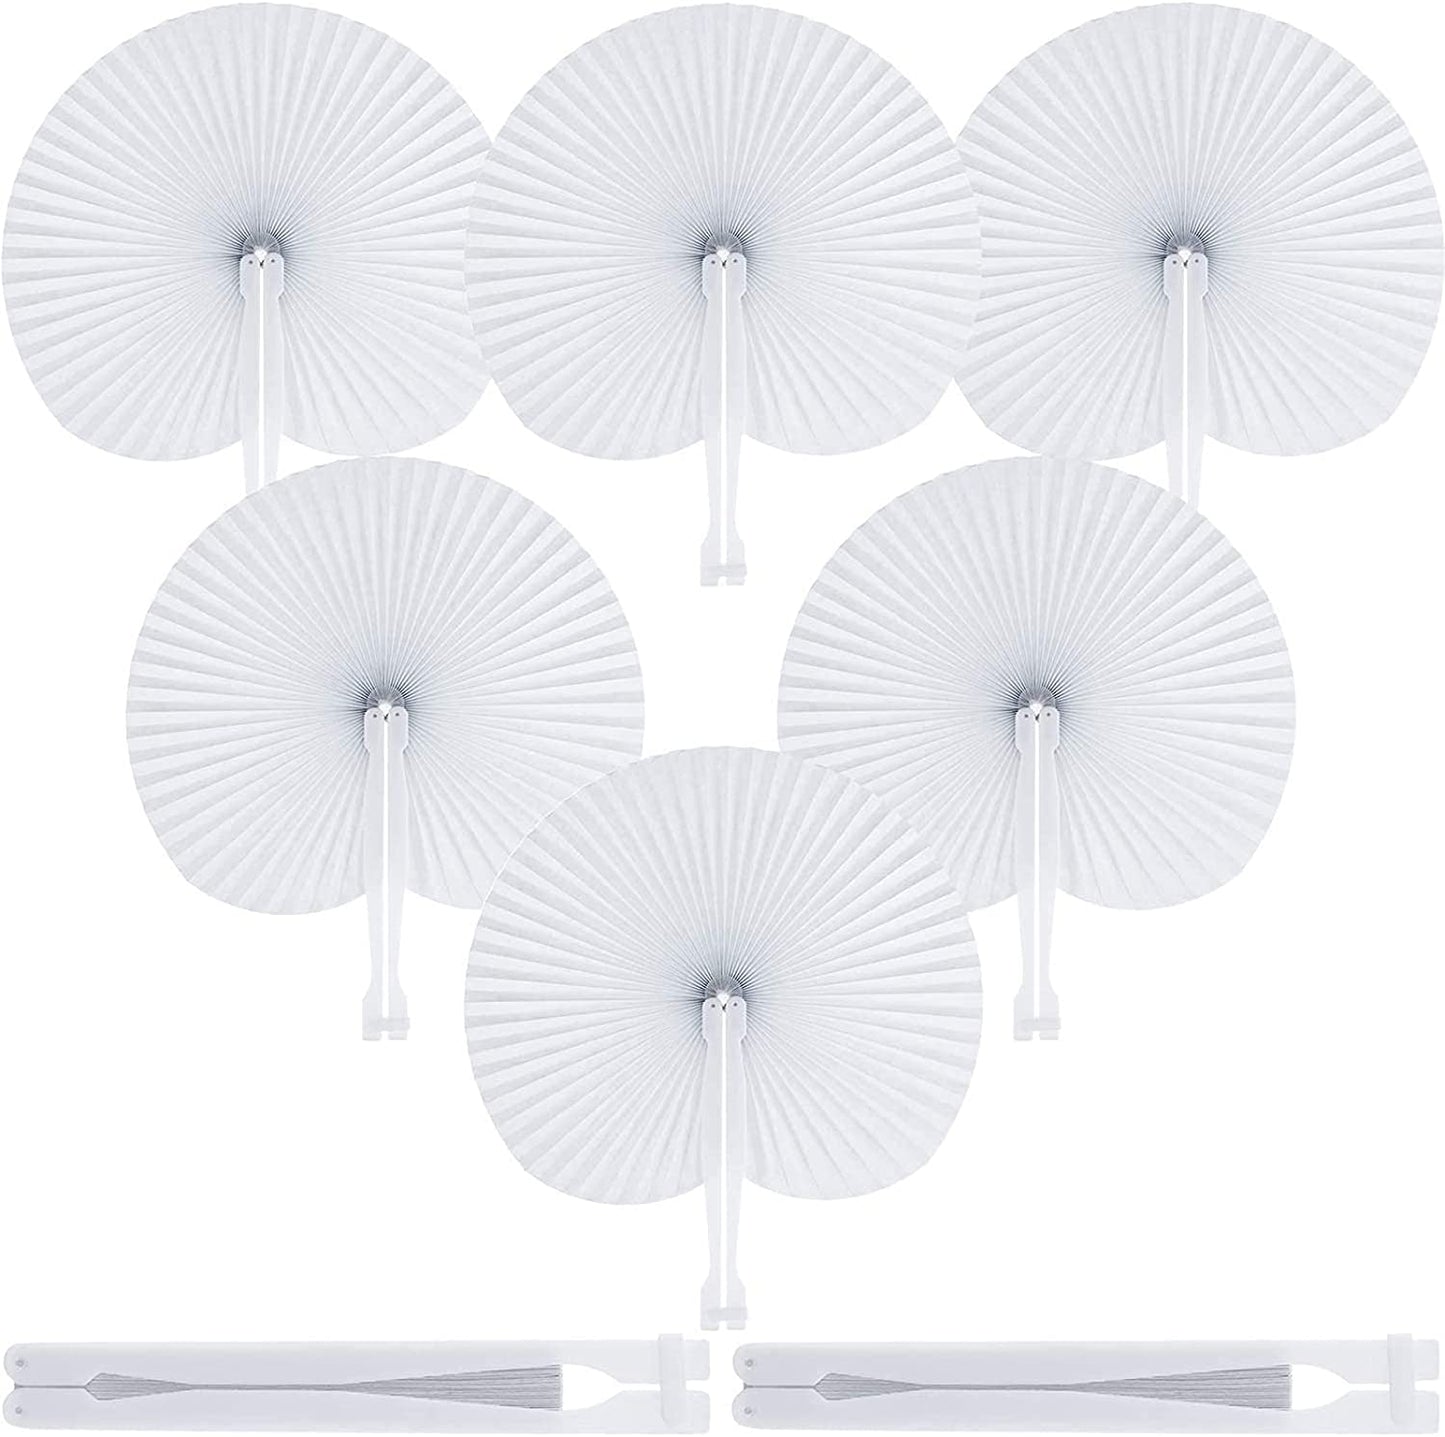 Gejoy 48 Pack Folding Paper Fans Round Accordion Folded Hanging Fans Handheld Assortment for Wedding Favor Birthday Baby Shower Party Bag Filler, White - (For 6 piece(s))